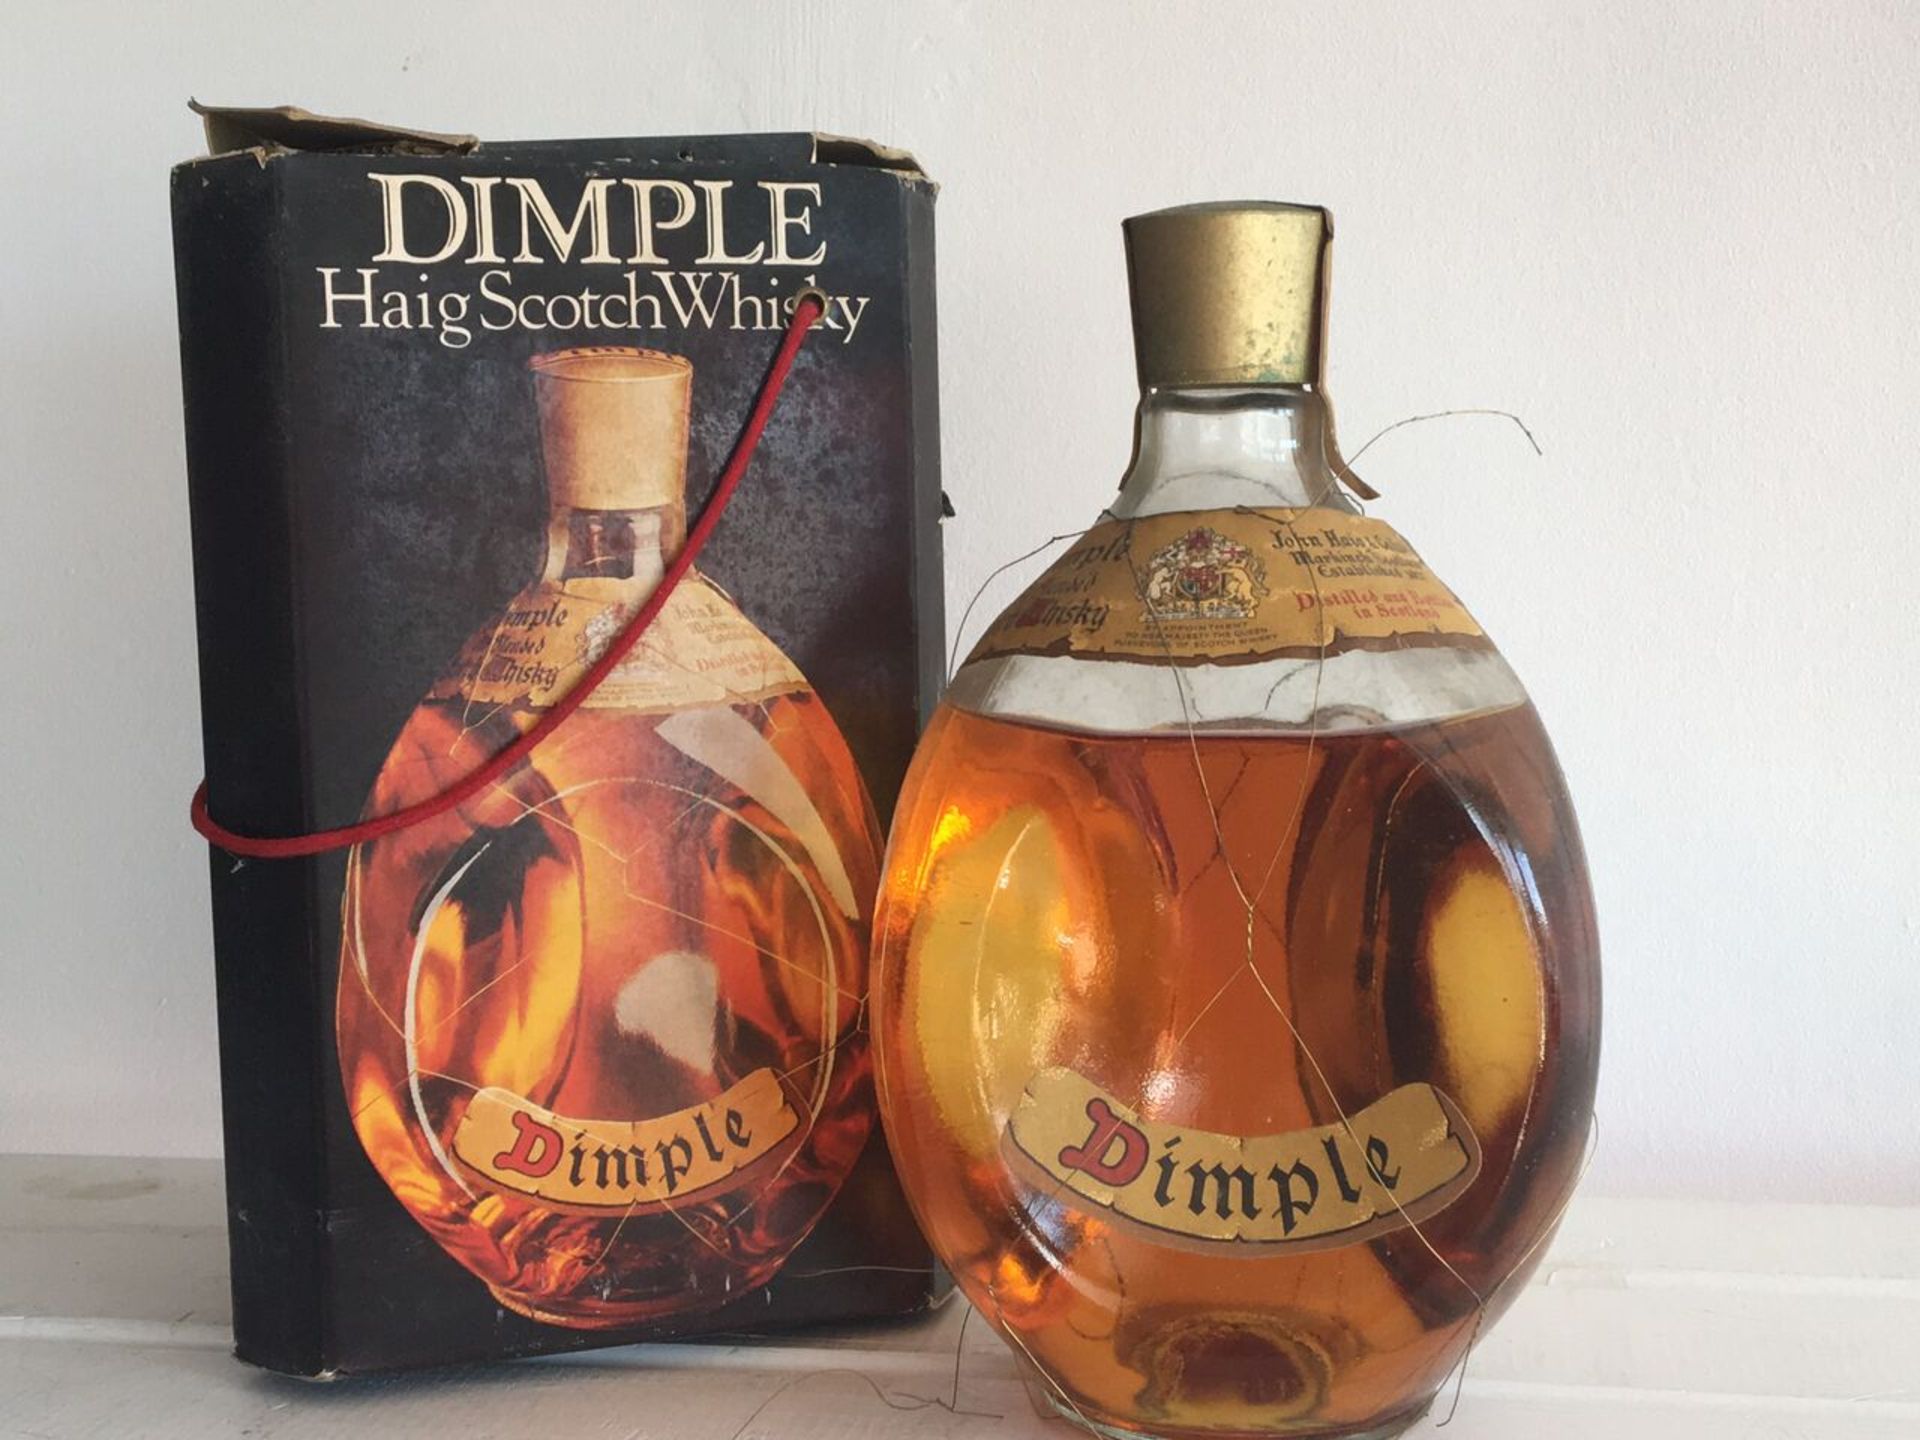 1960S OR 1970S DIMPLE HAIG SCOTCH WHISKY BOTTLE WITH WIRE MESH, ORIGINAL PRESENTATION BOX AND